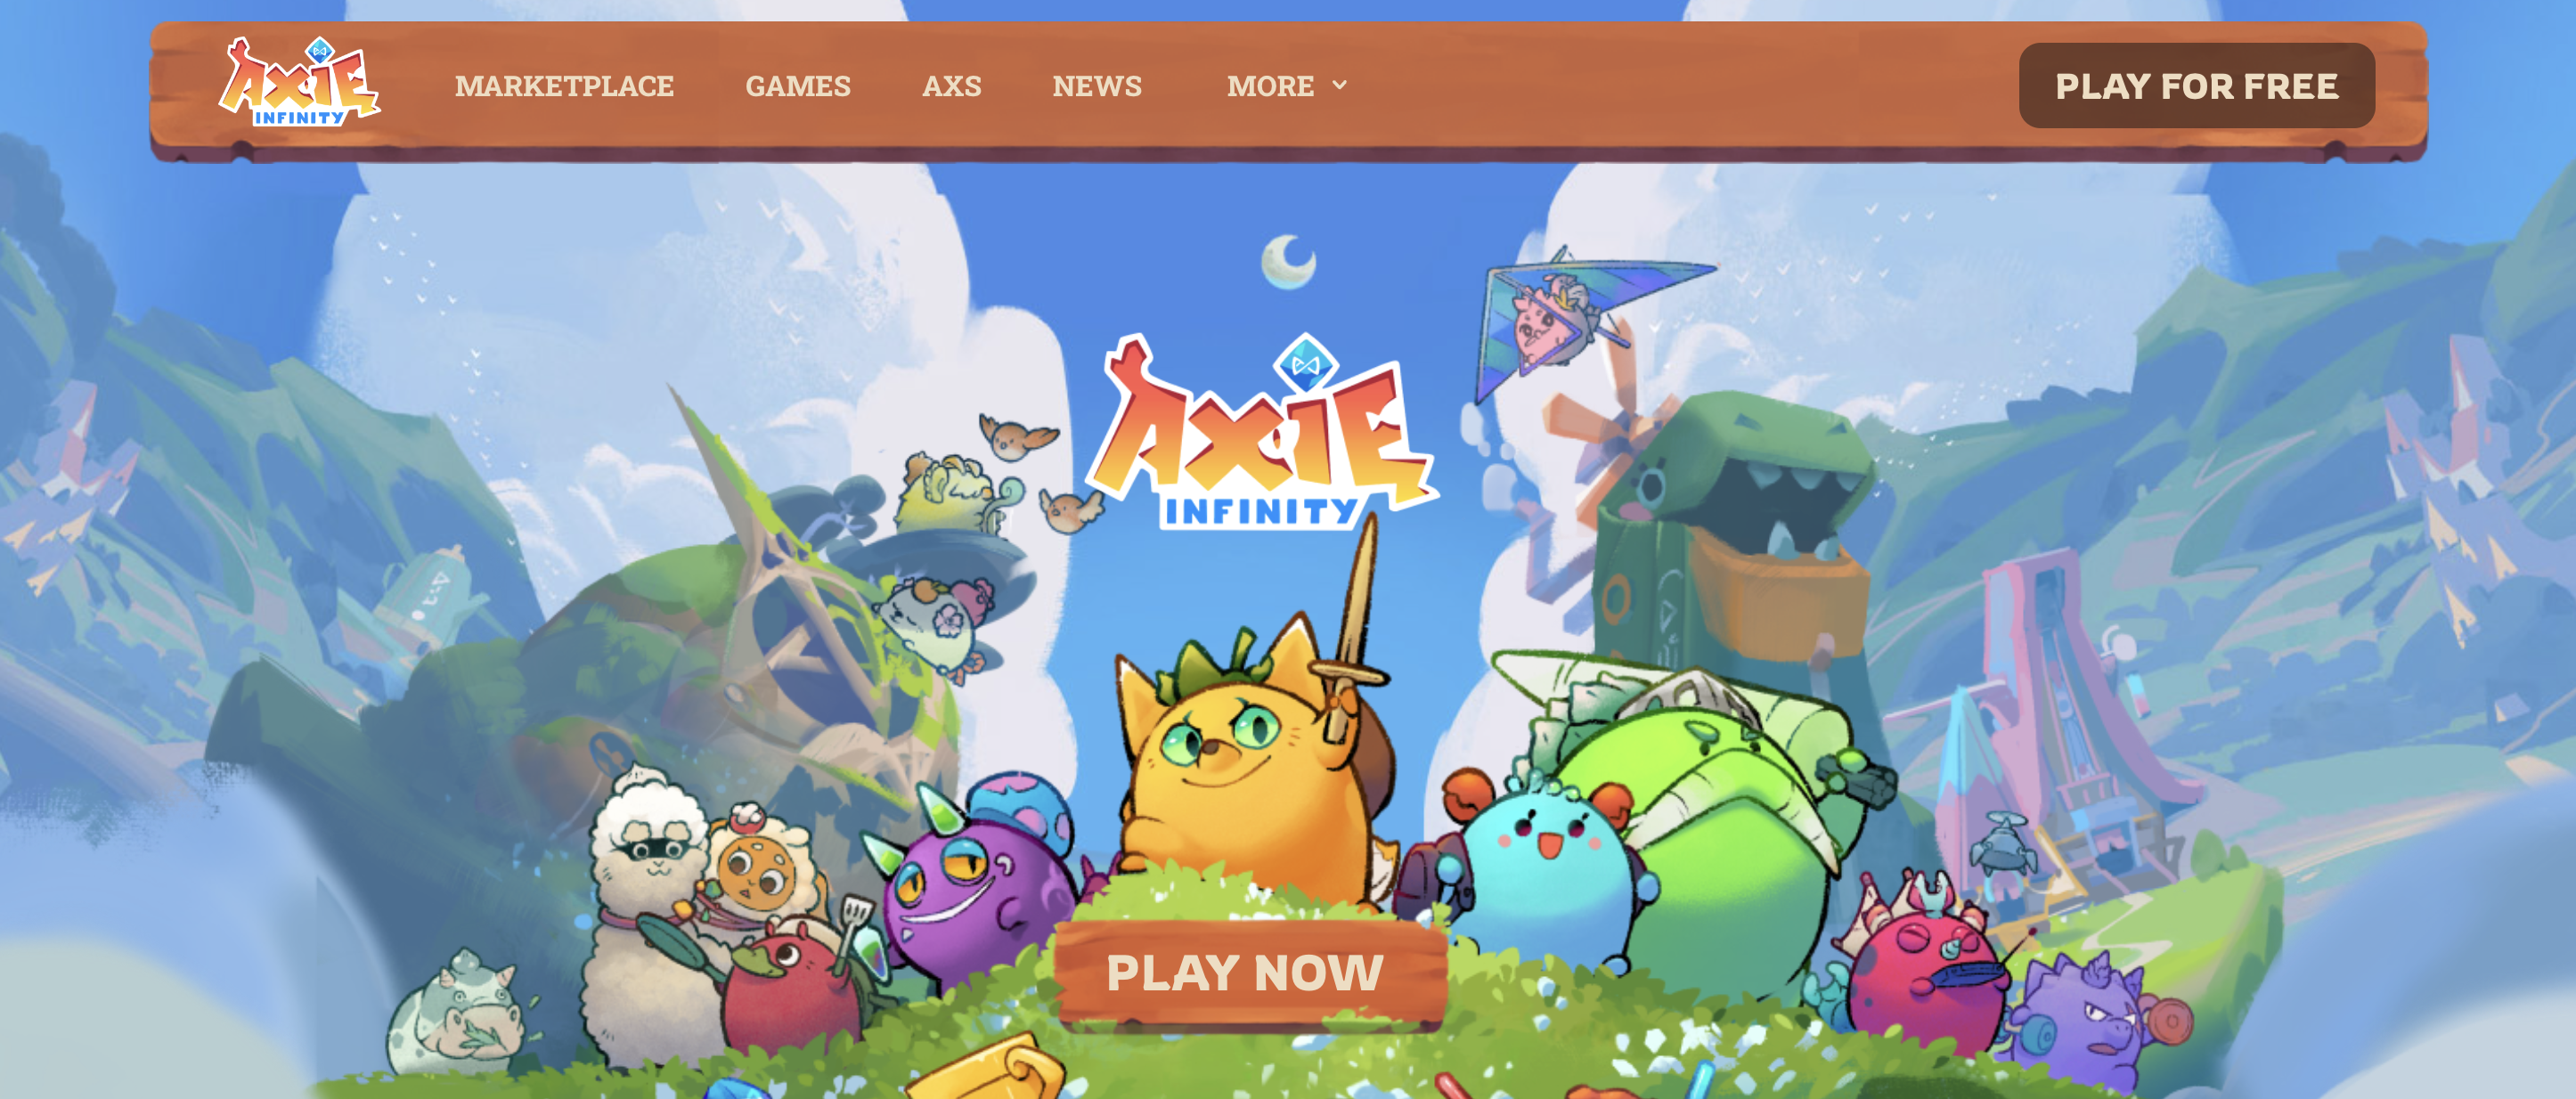 Axie Infinity - Top 2 Game on the Web3 Games List